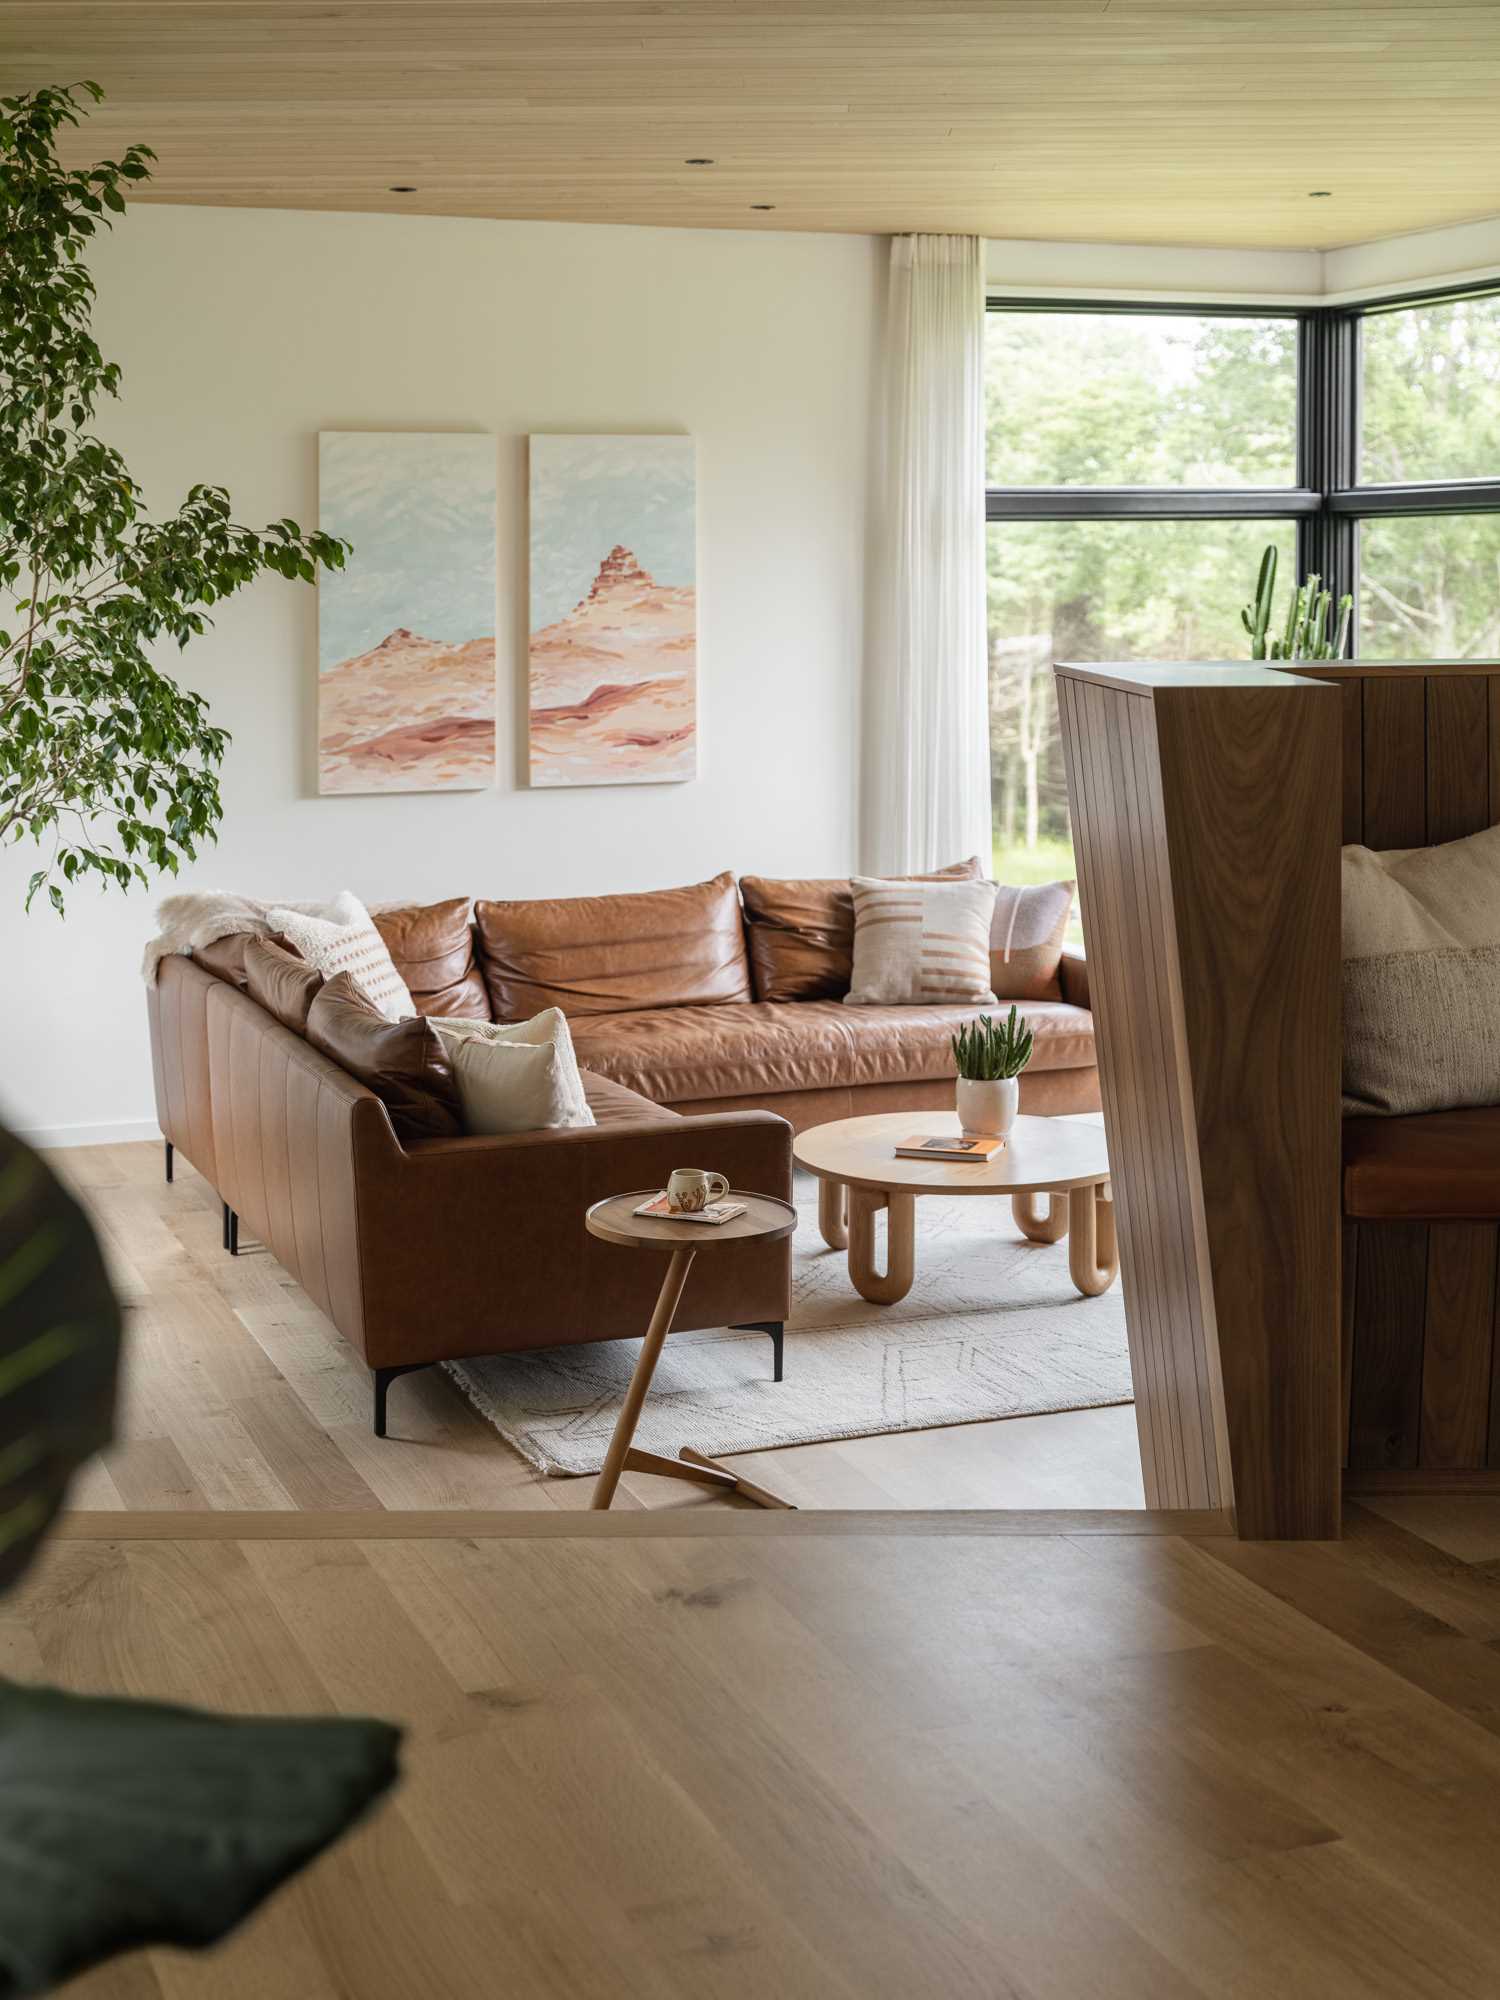 In this modern living room, there's a wood ceiling, large brown leather couch, and a few plants.